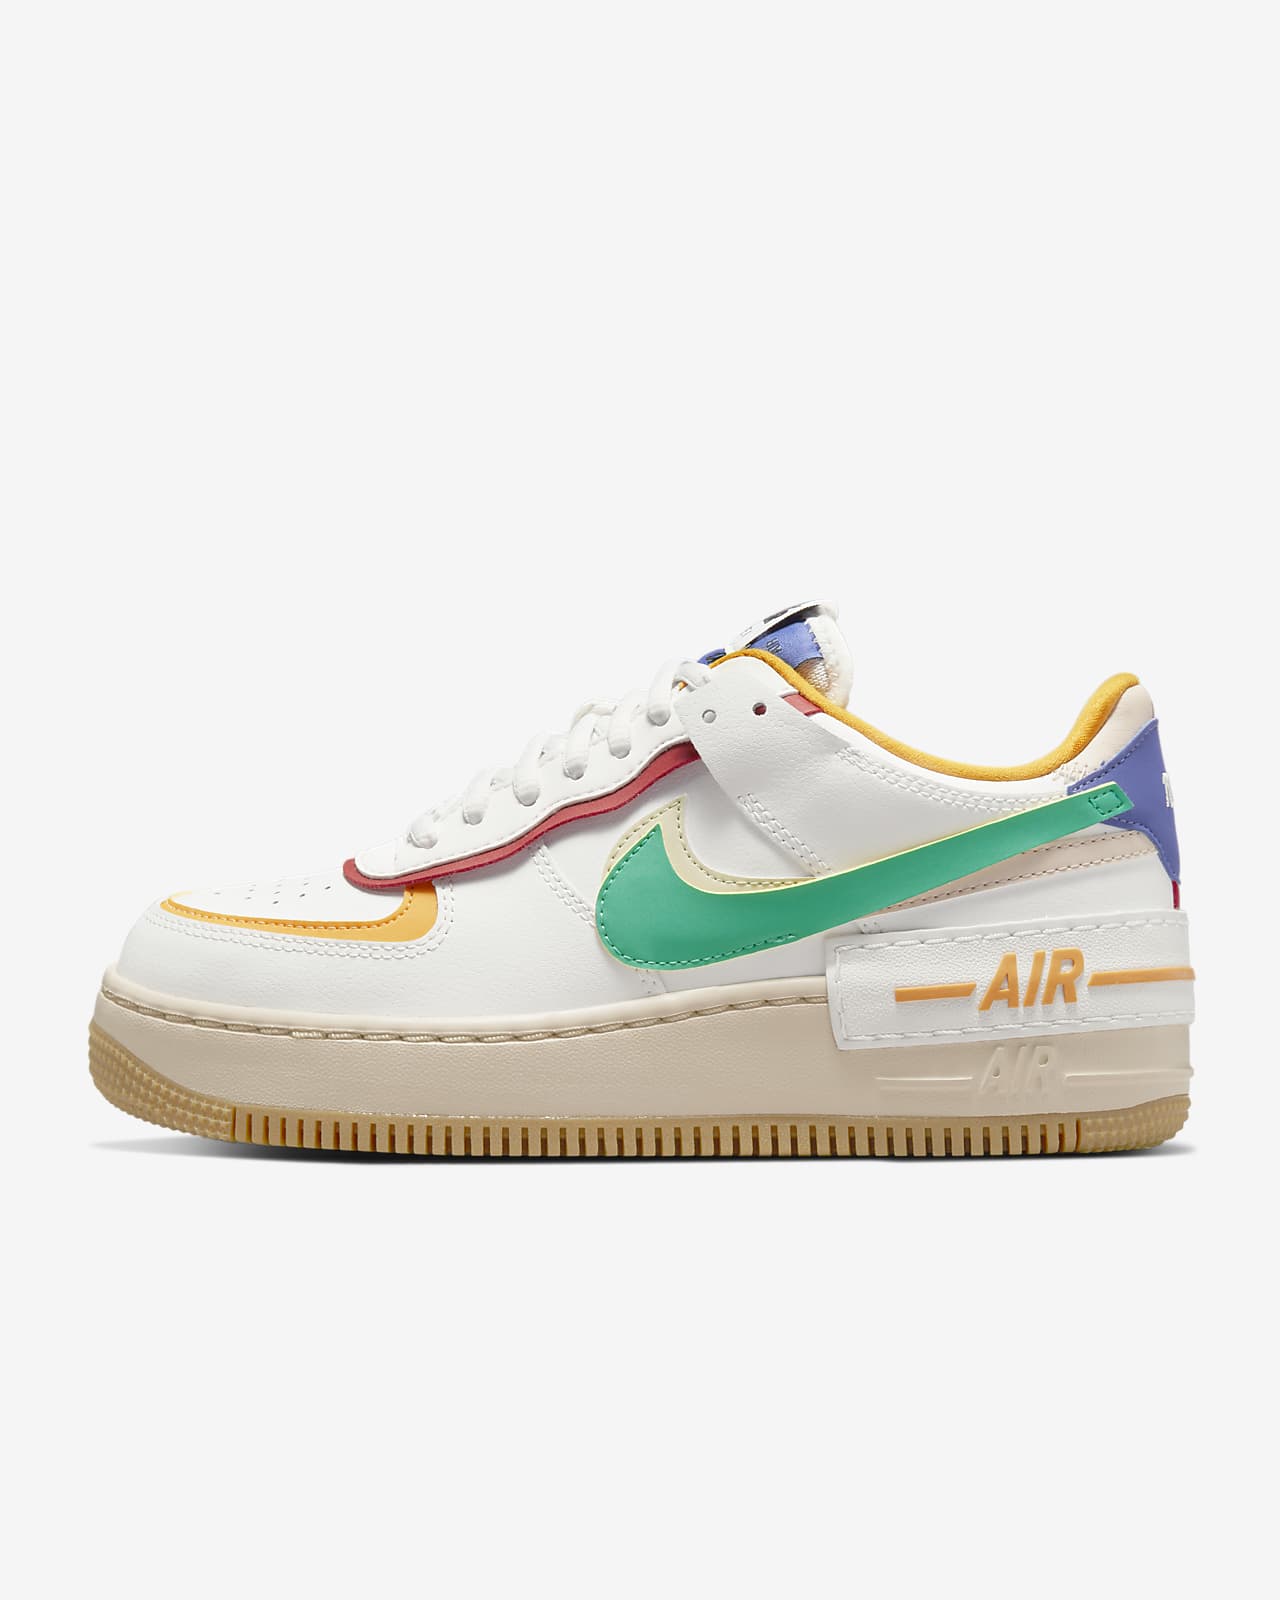 Nike Air Force air force 1 sage 1 Shadow Women's Shoes